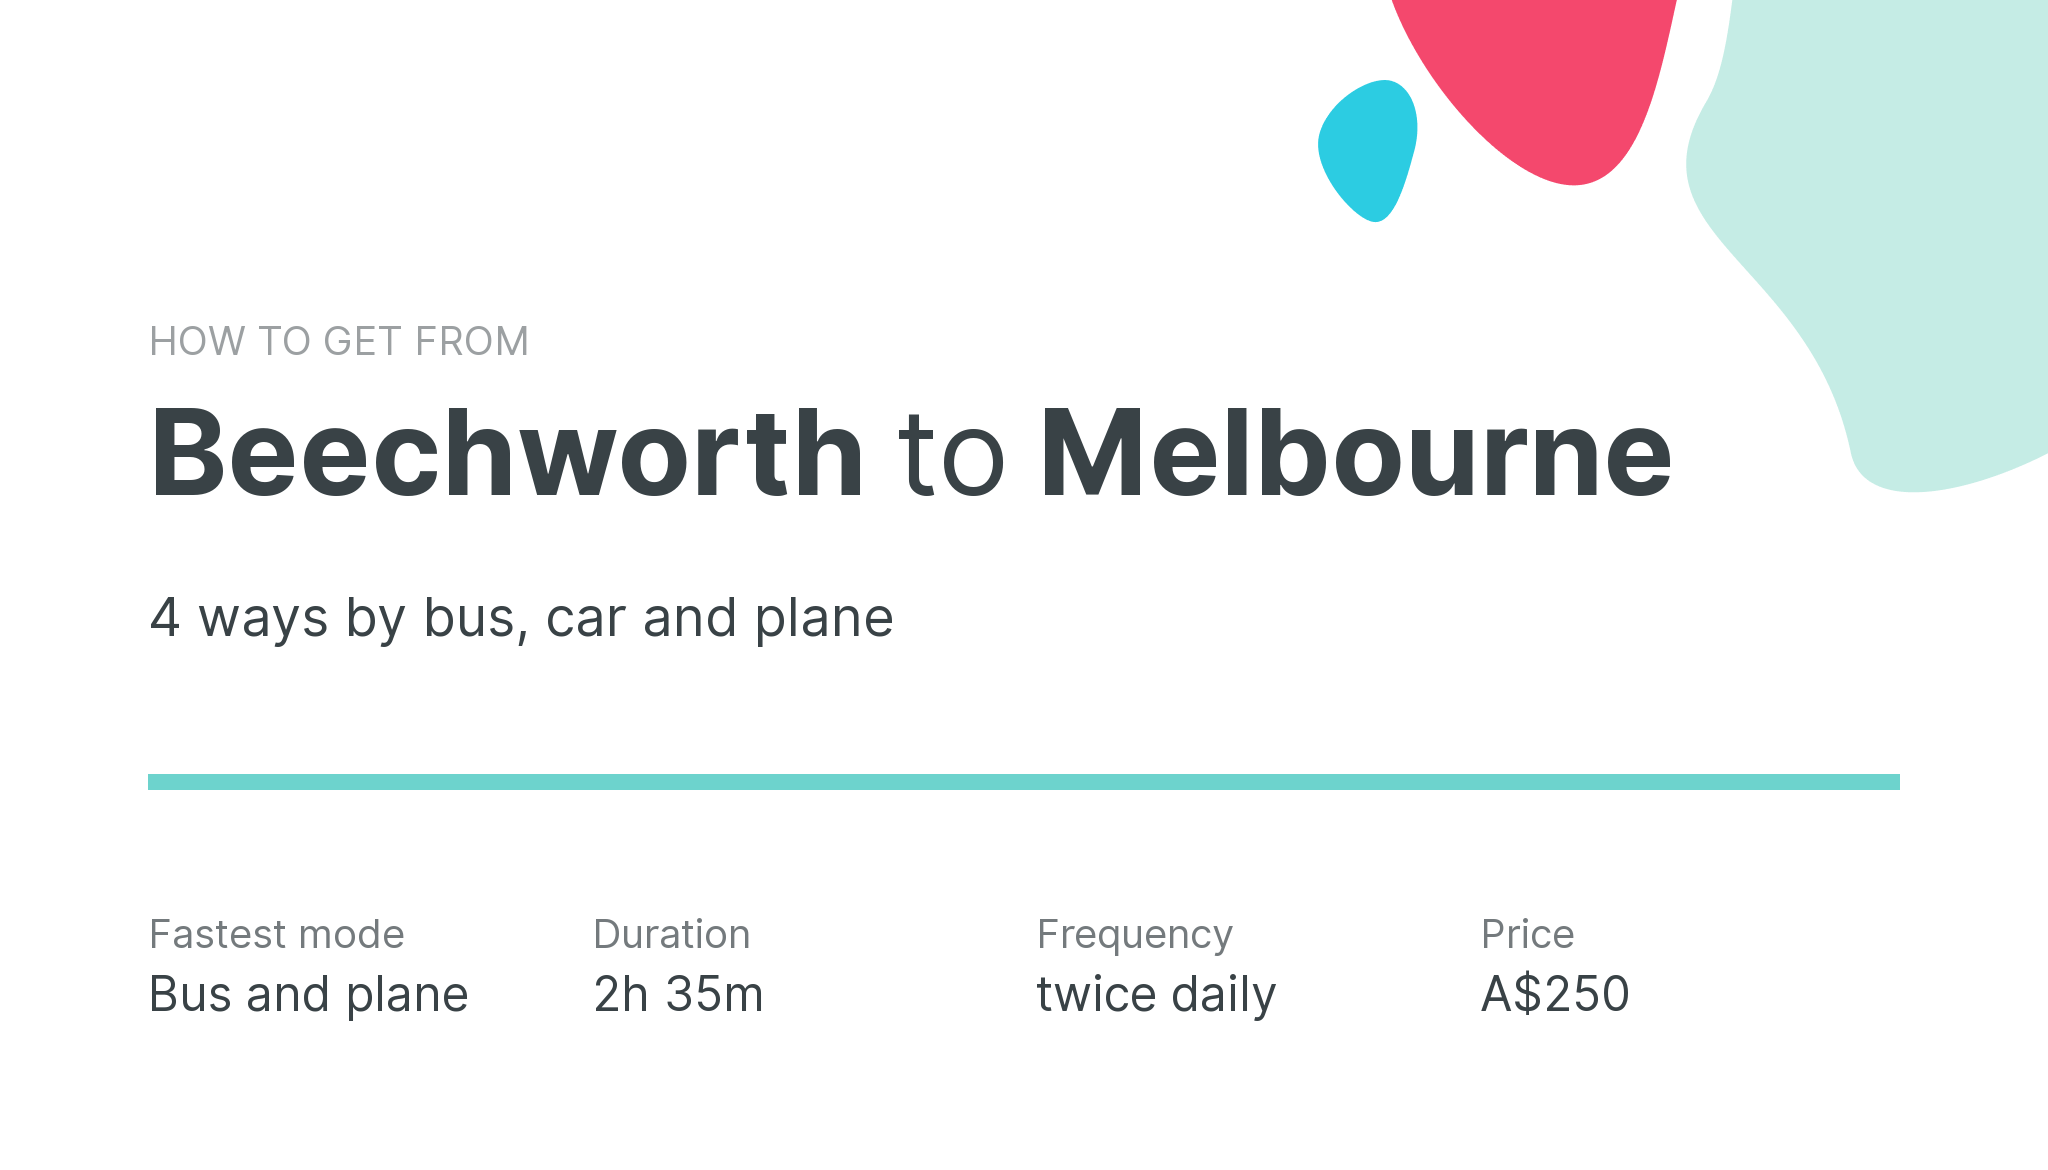 How do I get from Beechworth to Melbourne